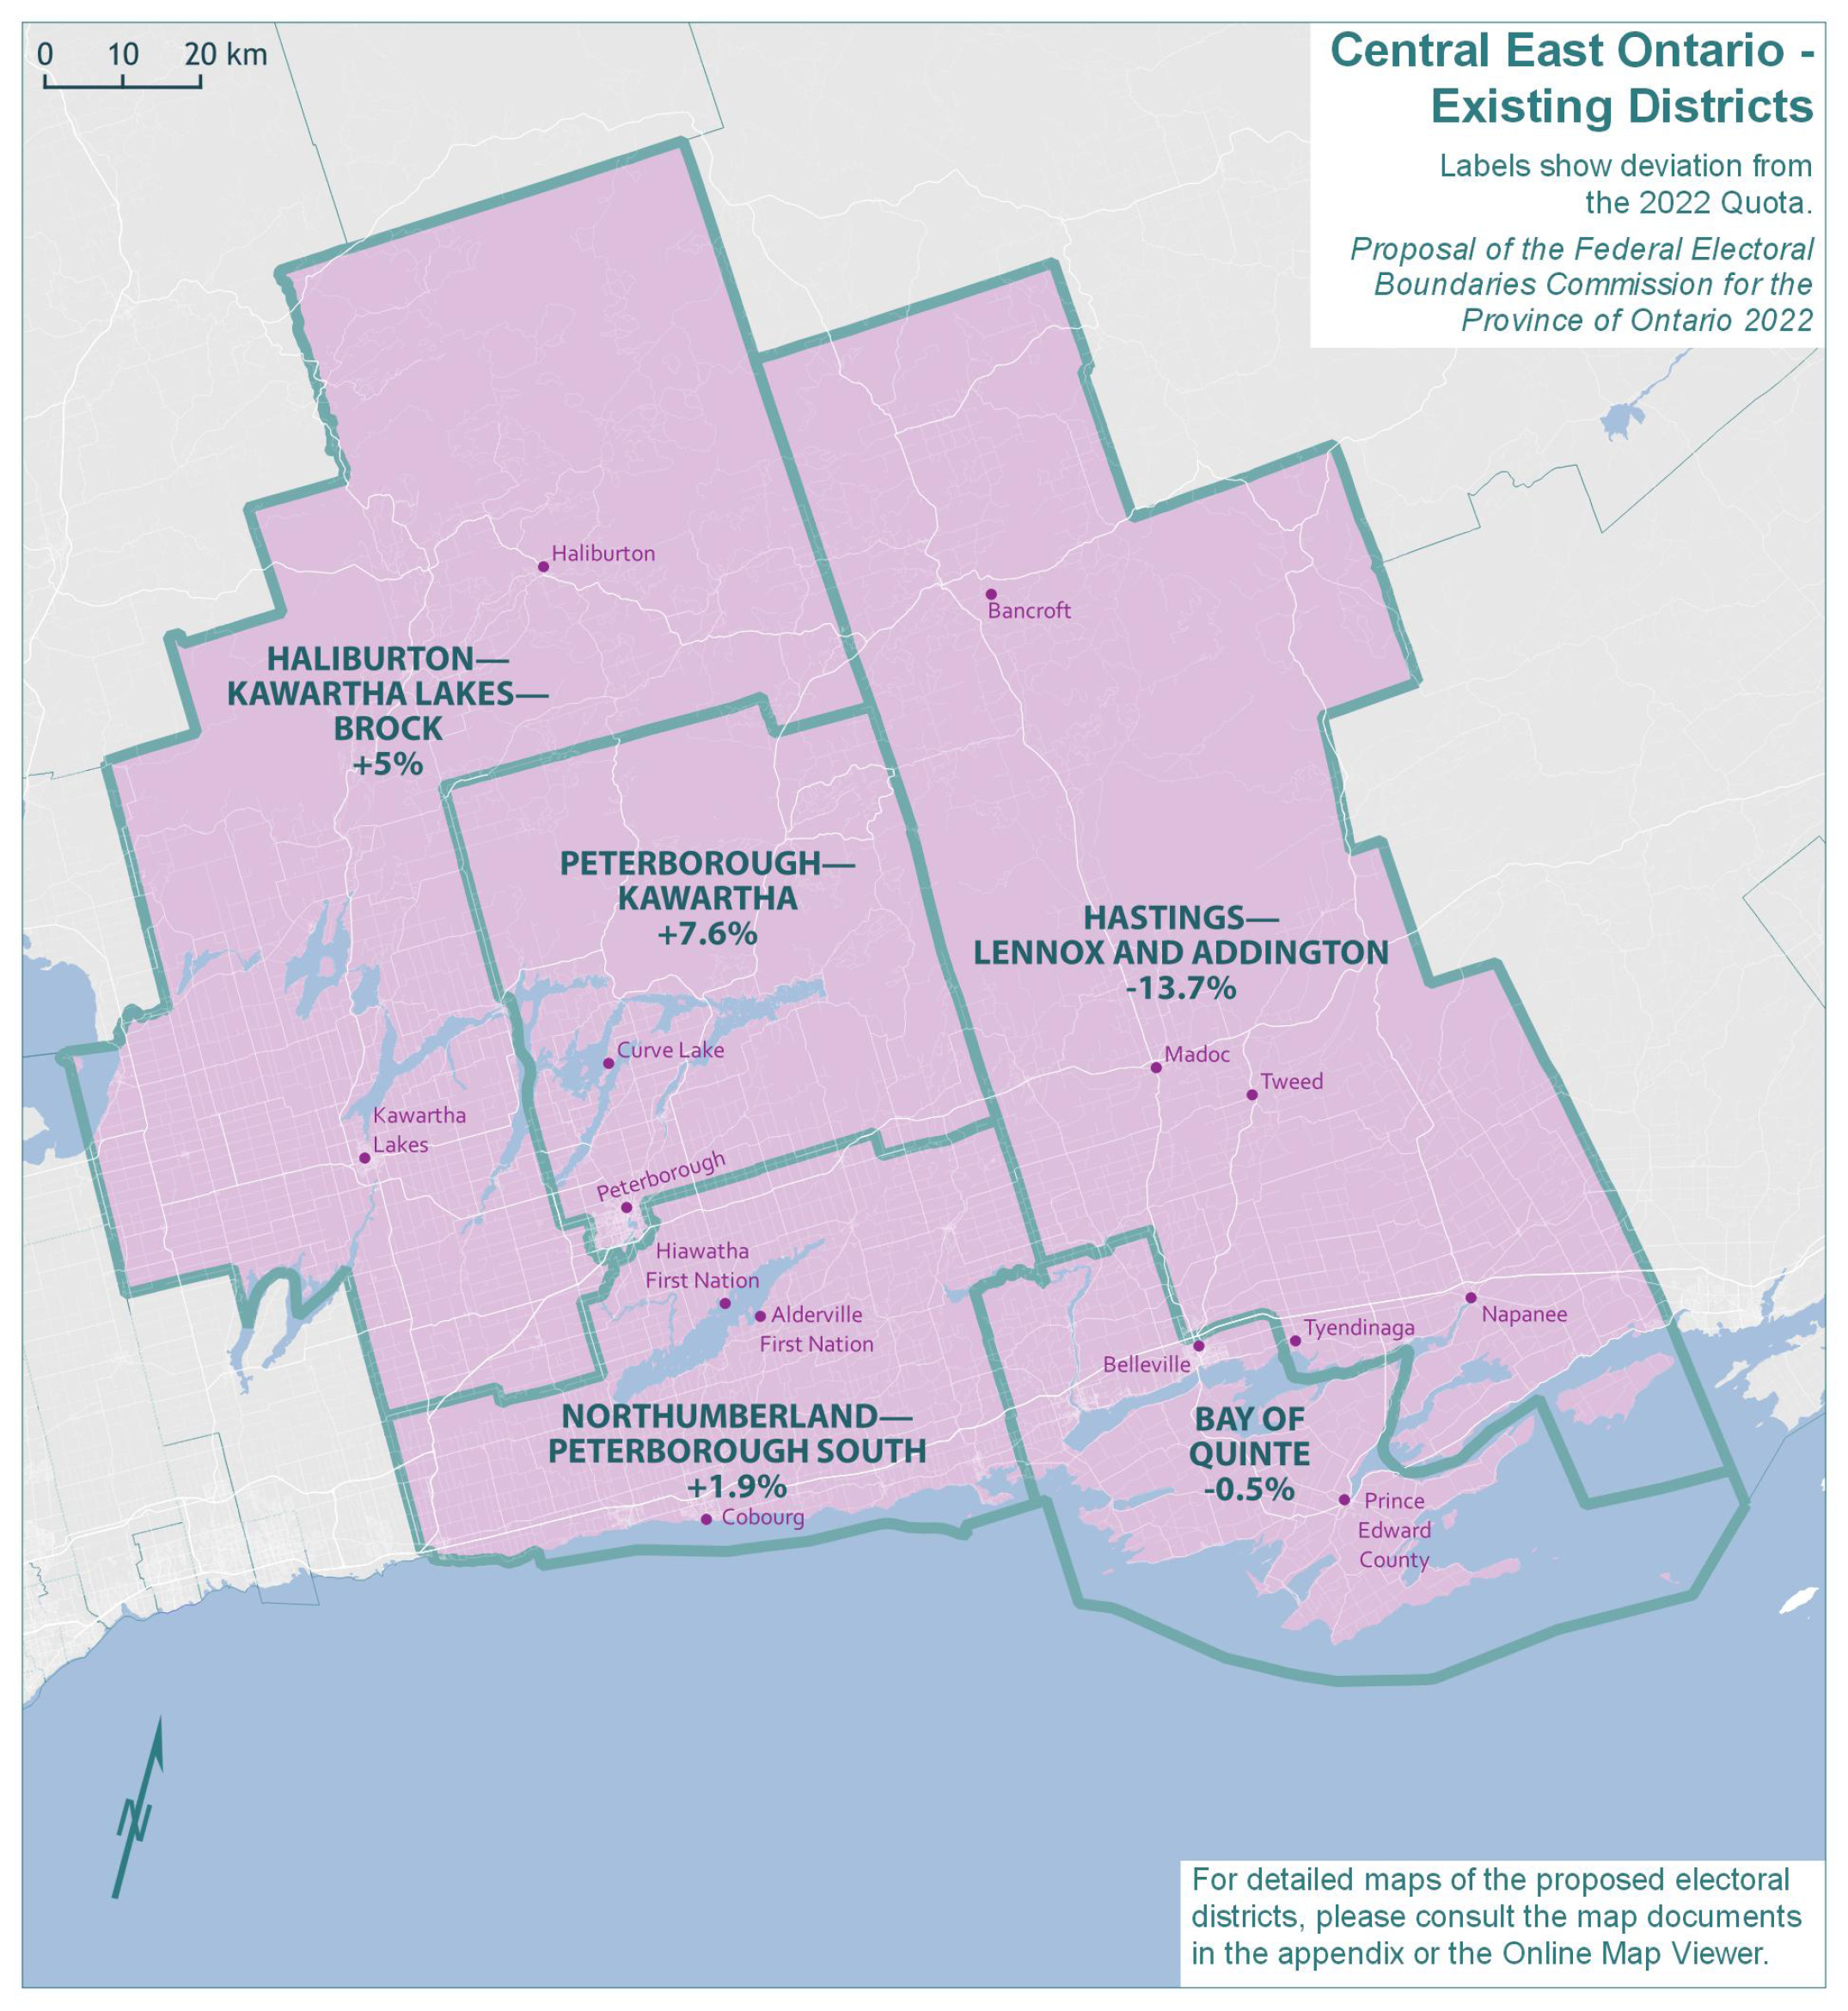 Central East Ontario - Existing Districts